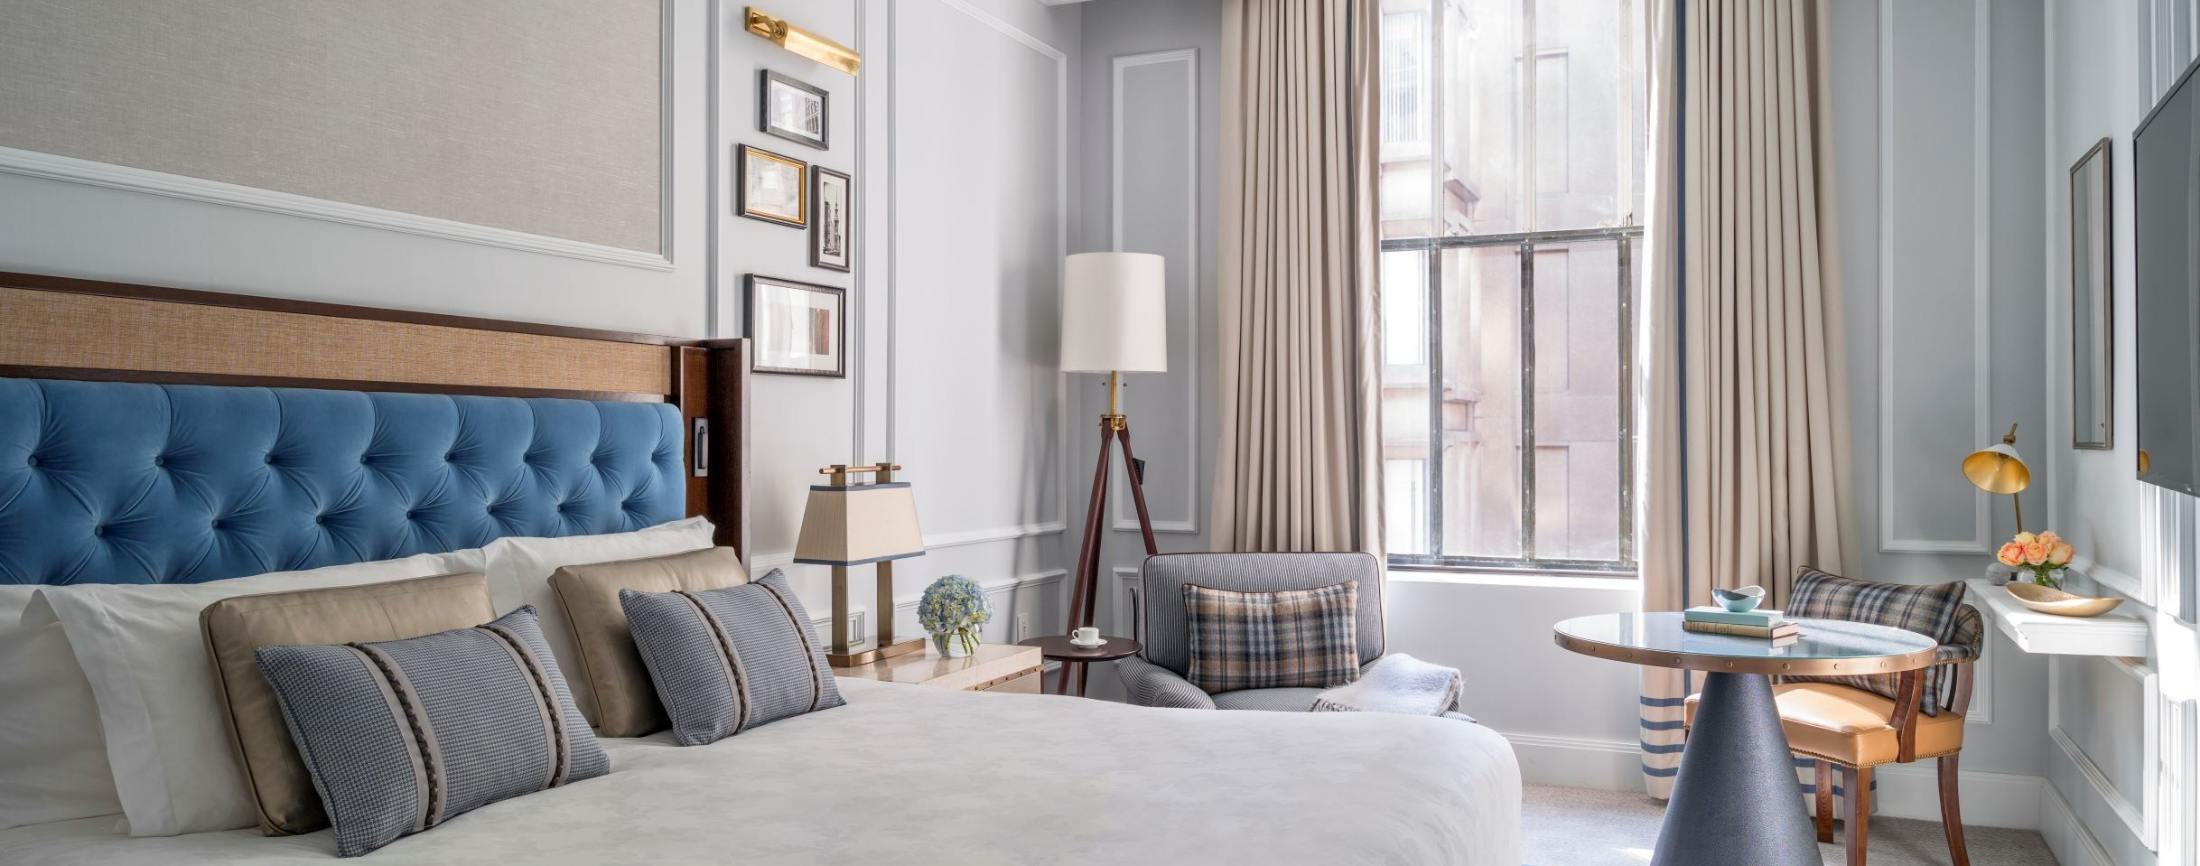 The Langham, Boston Reopens After a $200M Renovation